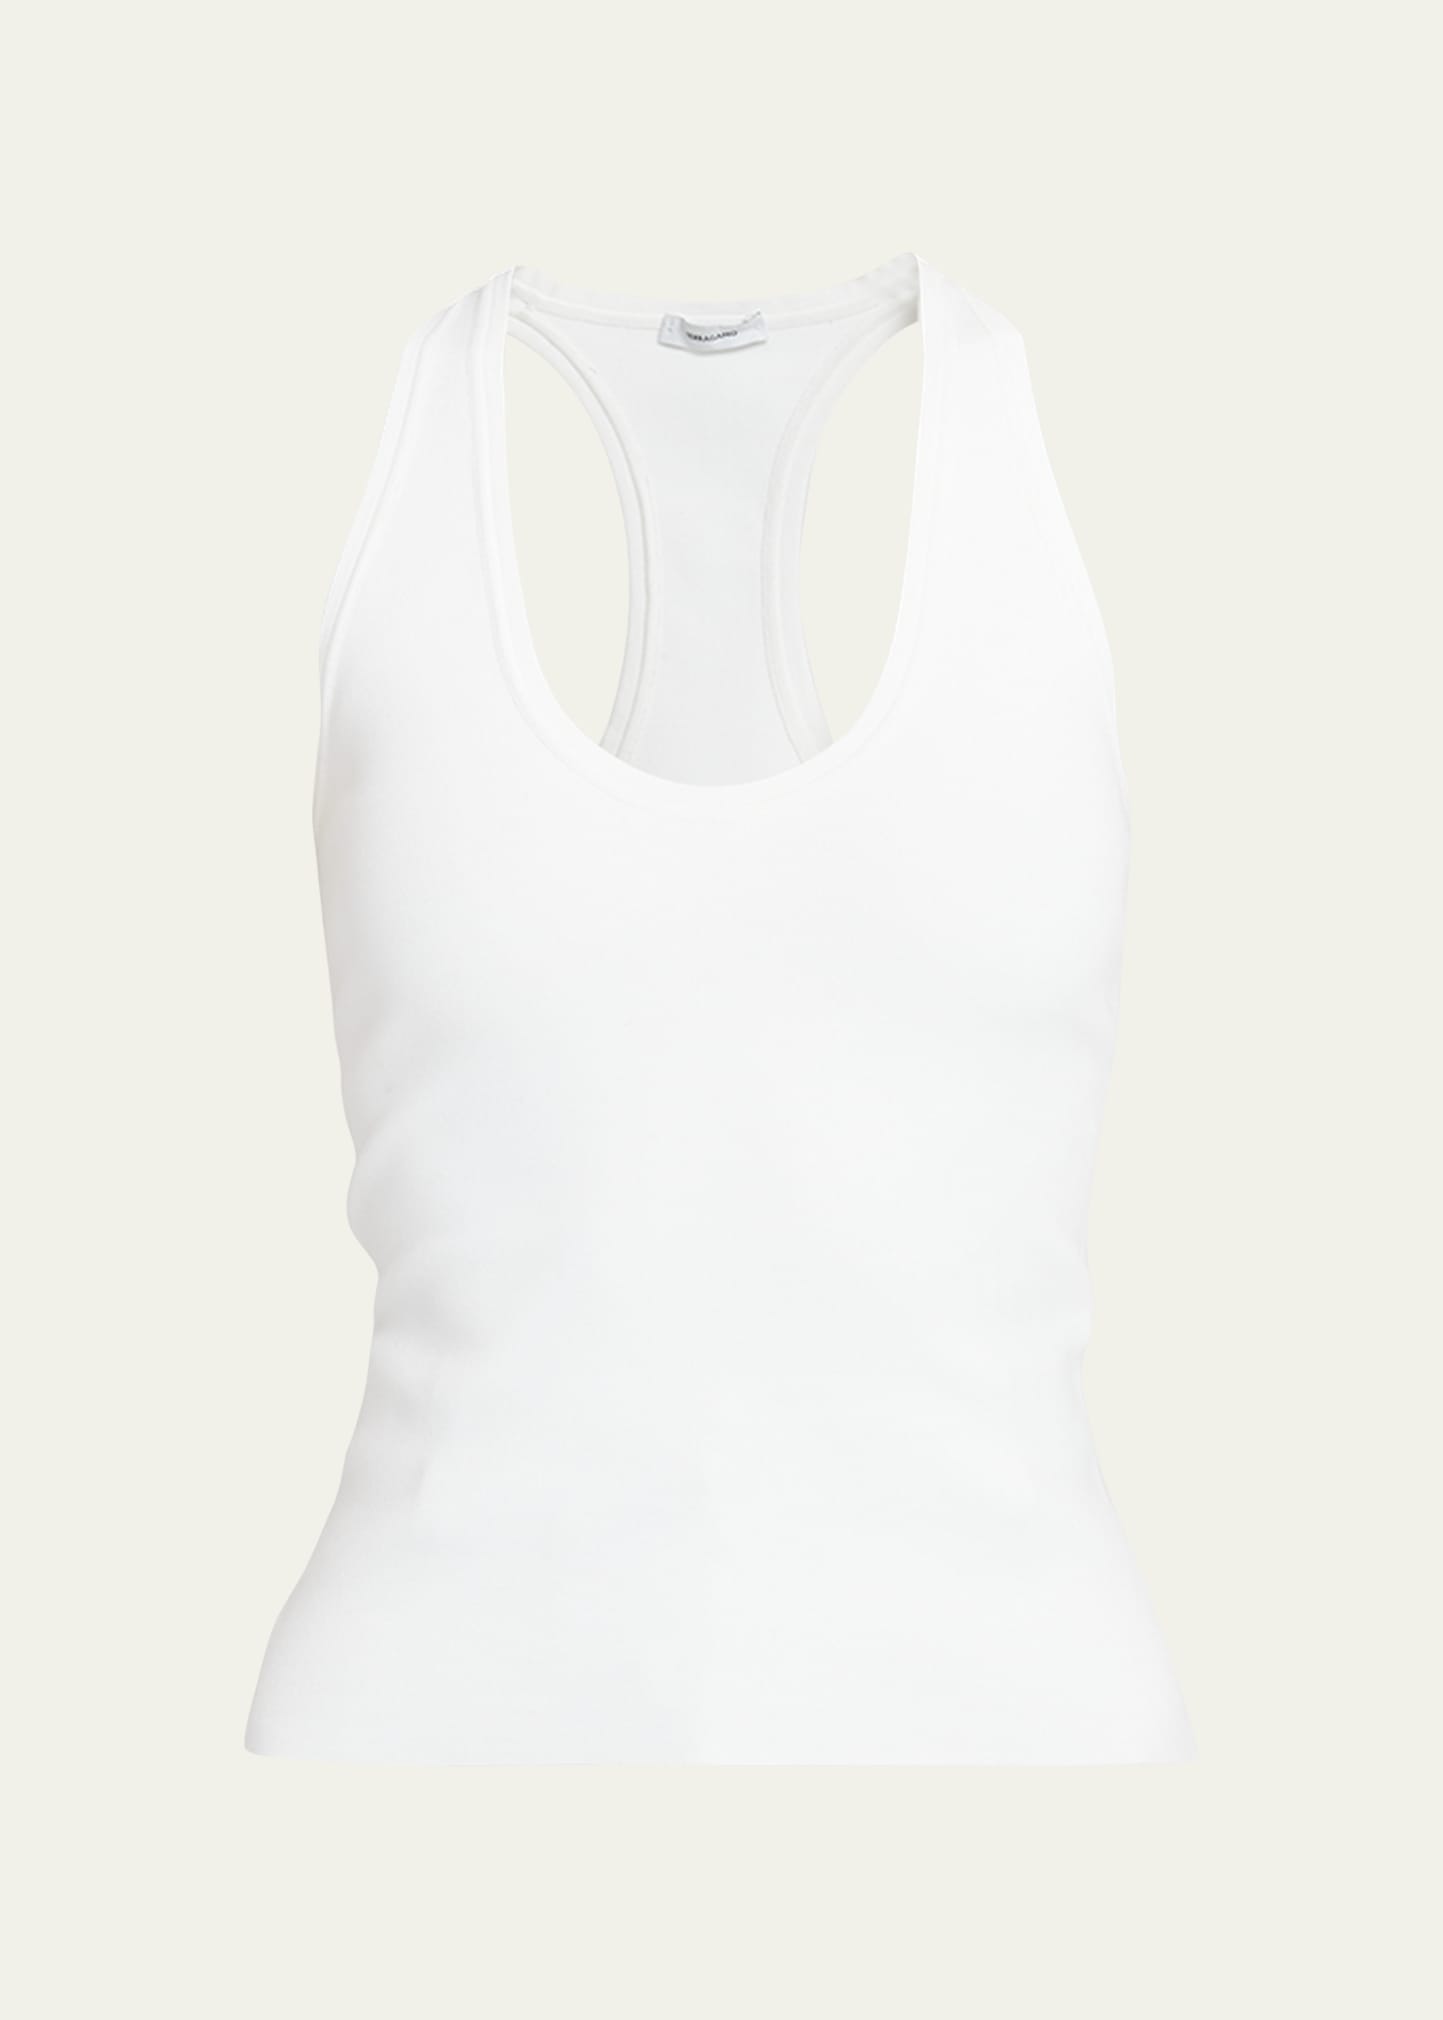 Fitted Racerback Tank Top